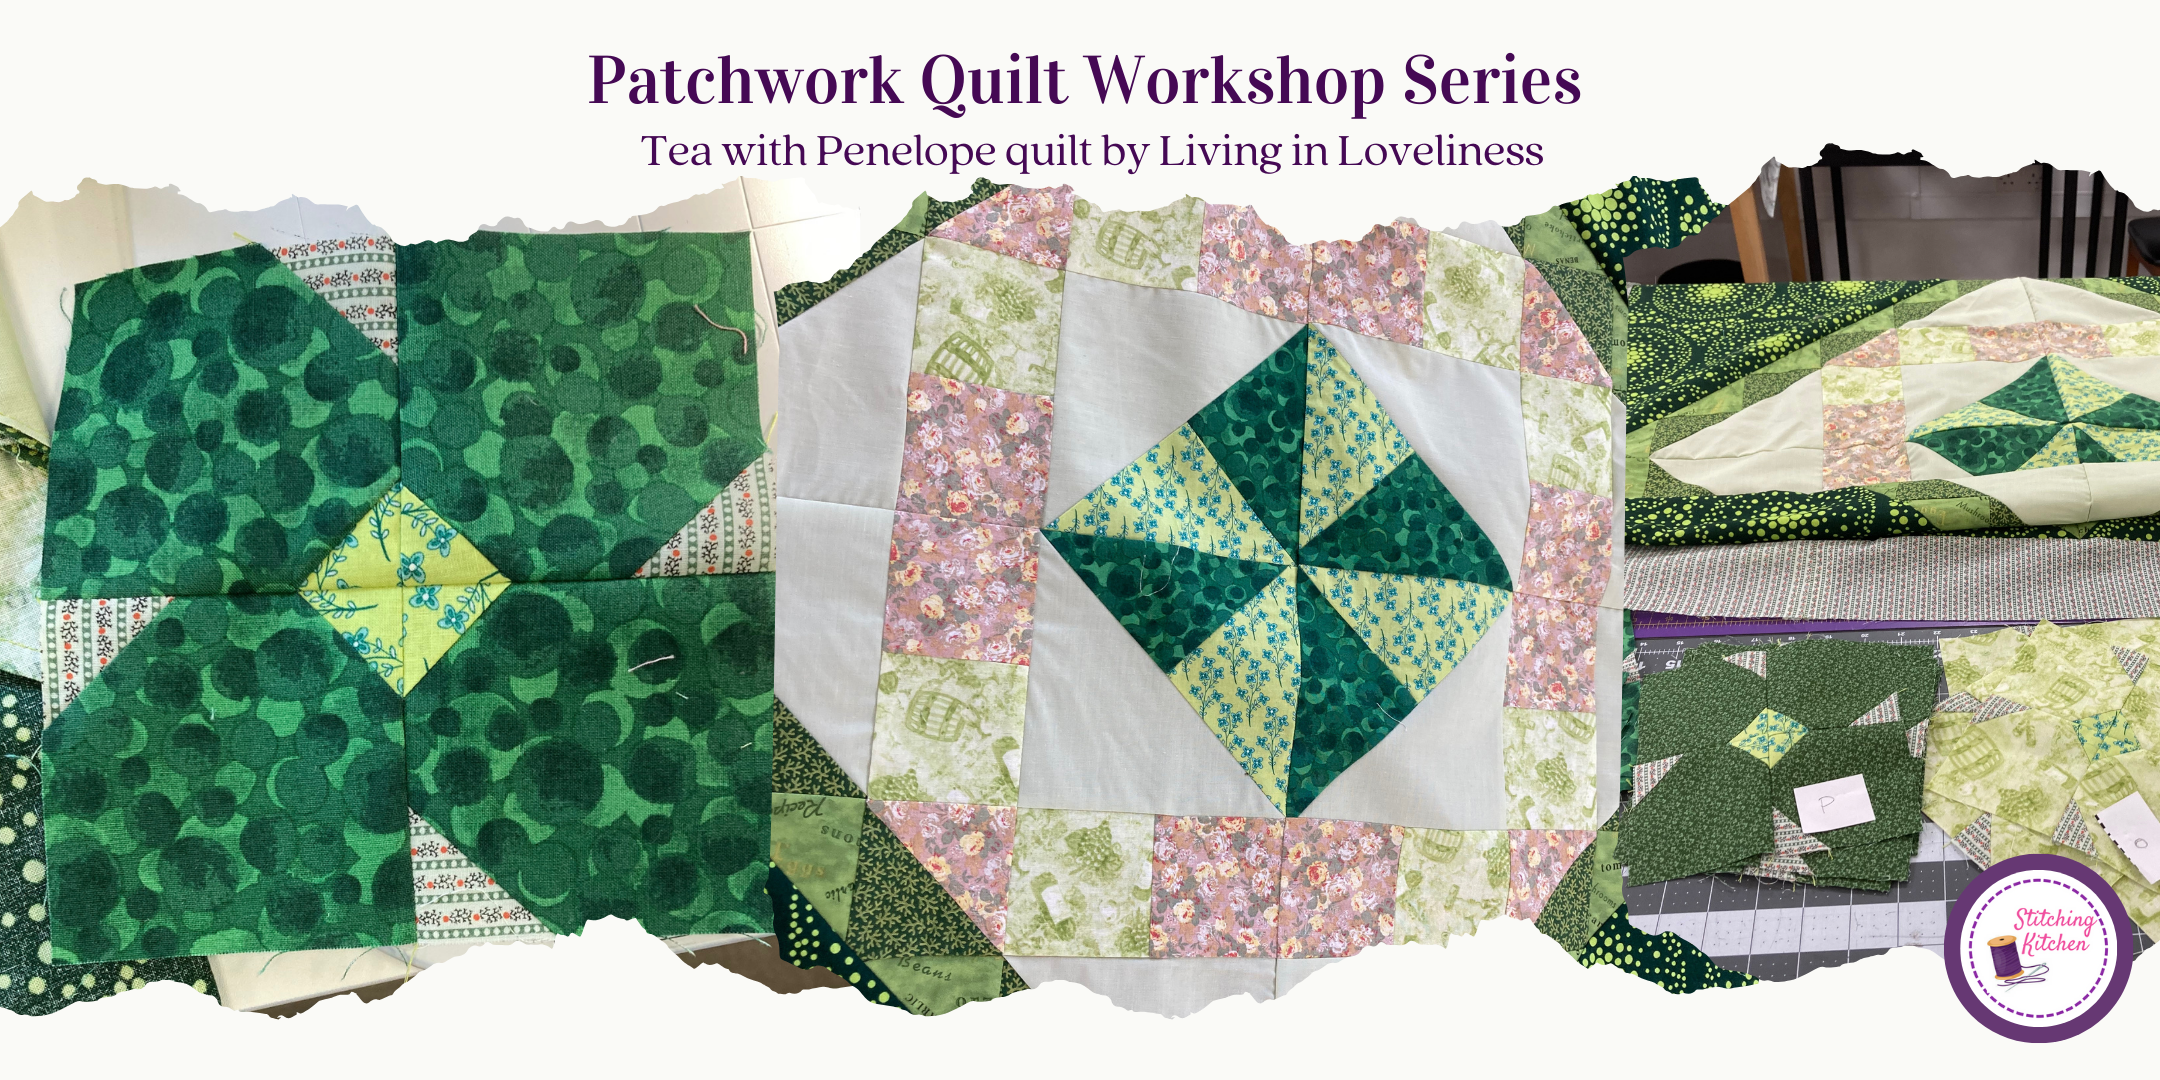 Tea with Penelope Quilt - Patchwork & Quilting for Beginners